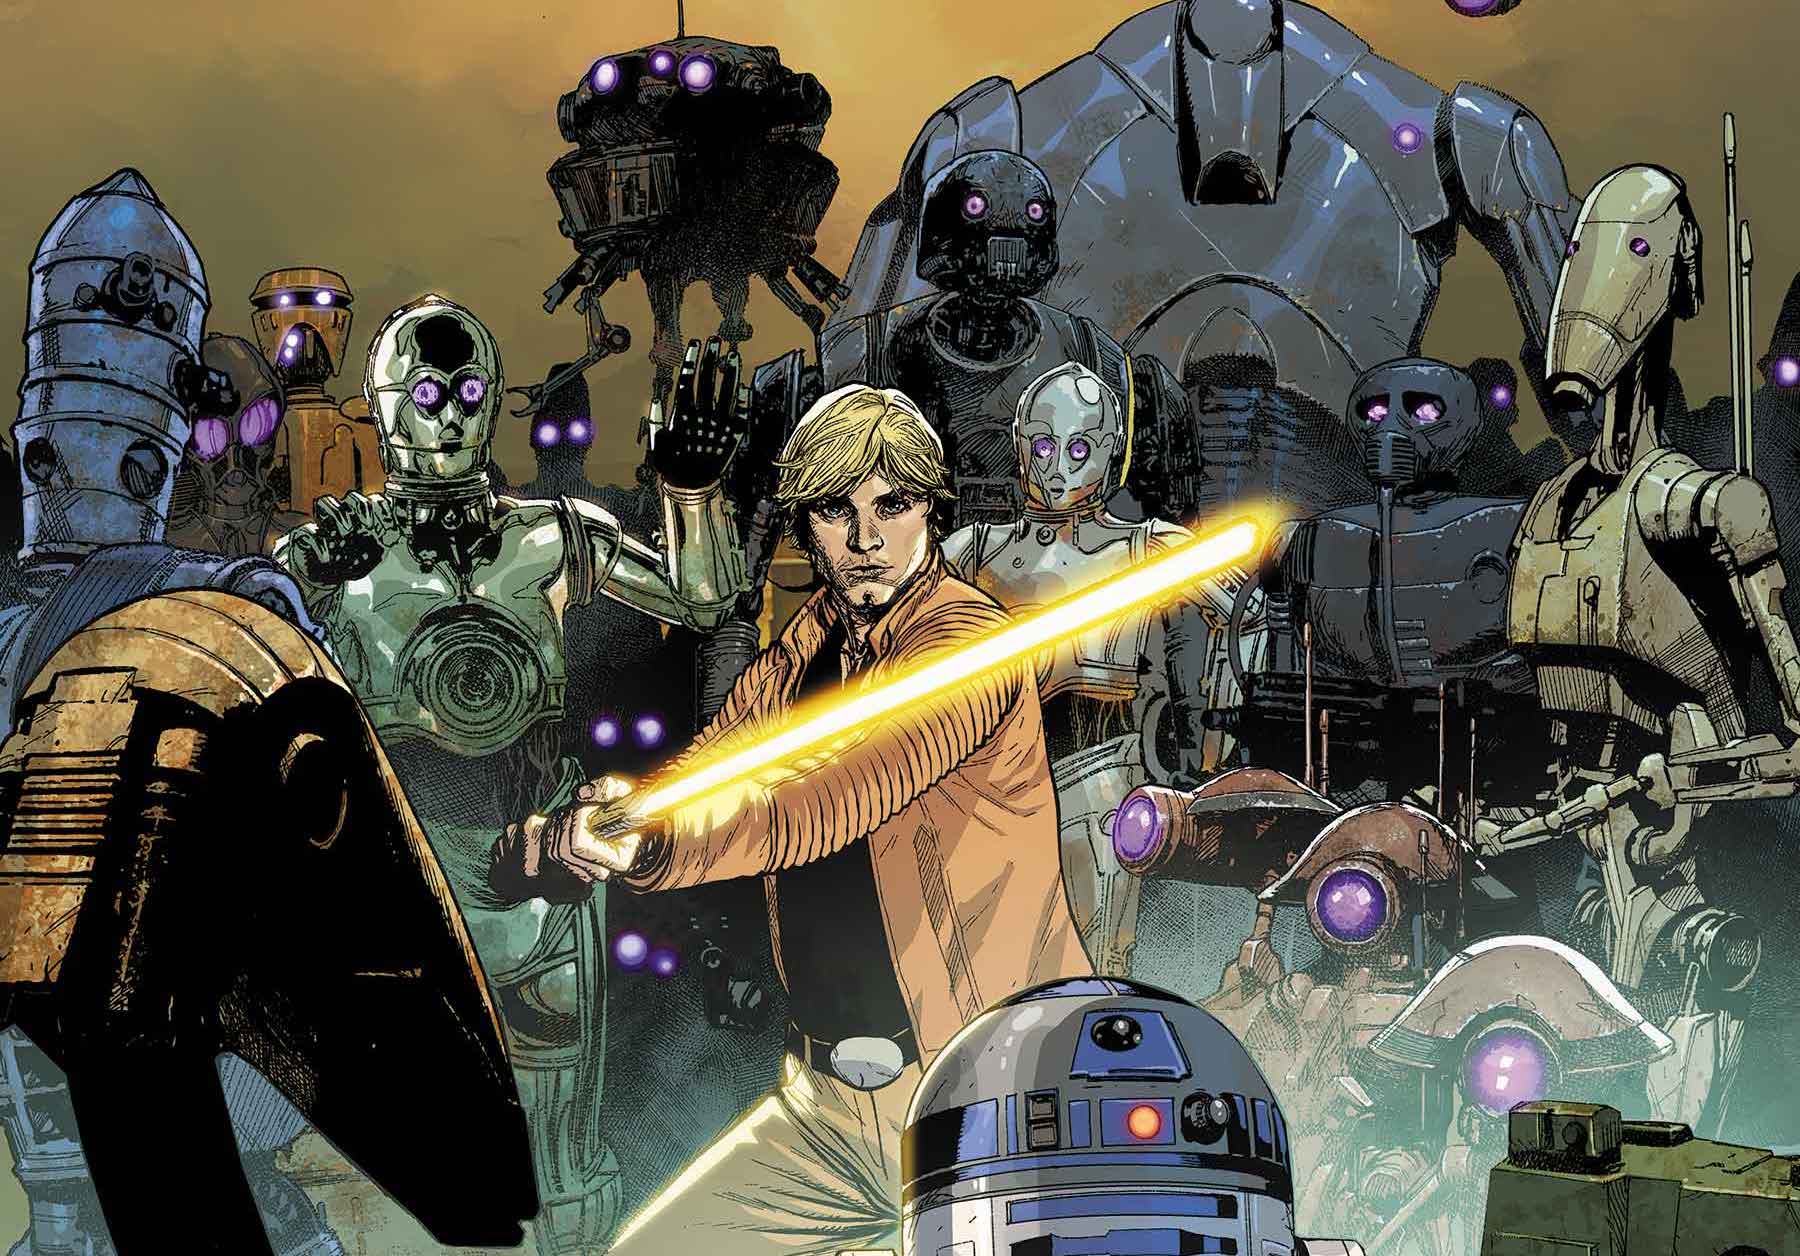 Star Wars gets scary with 'Dark Droids' comics event starting August 2023